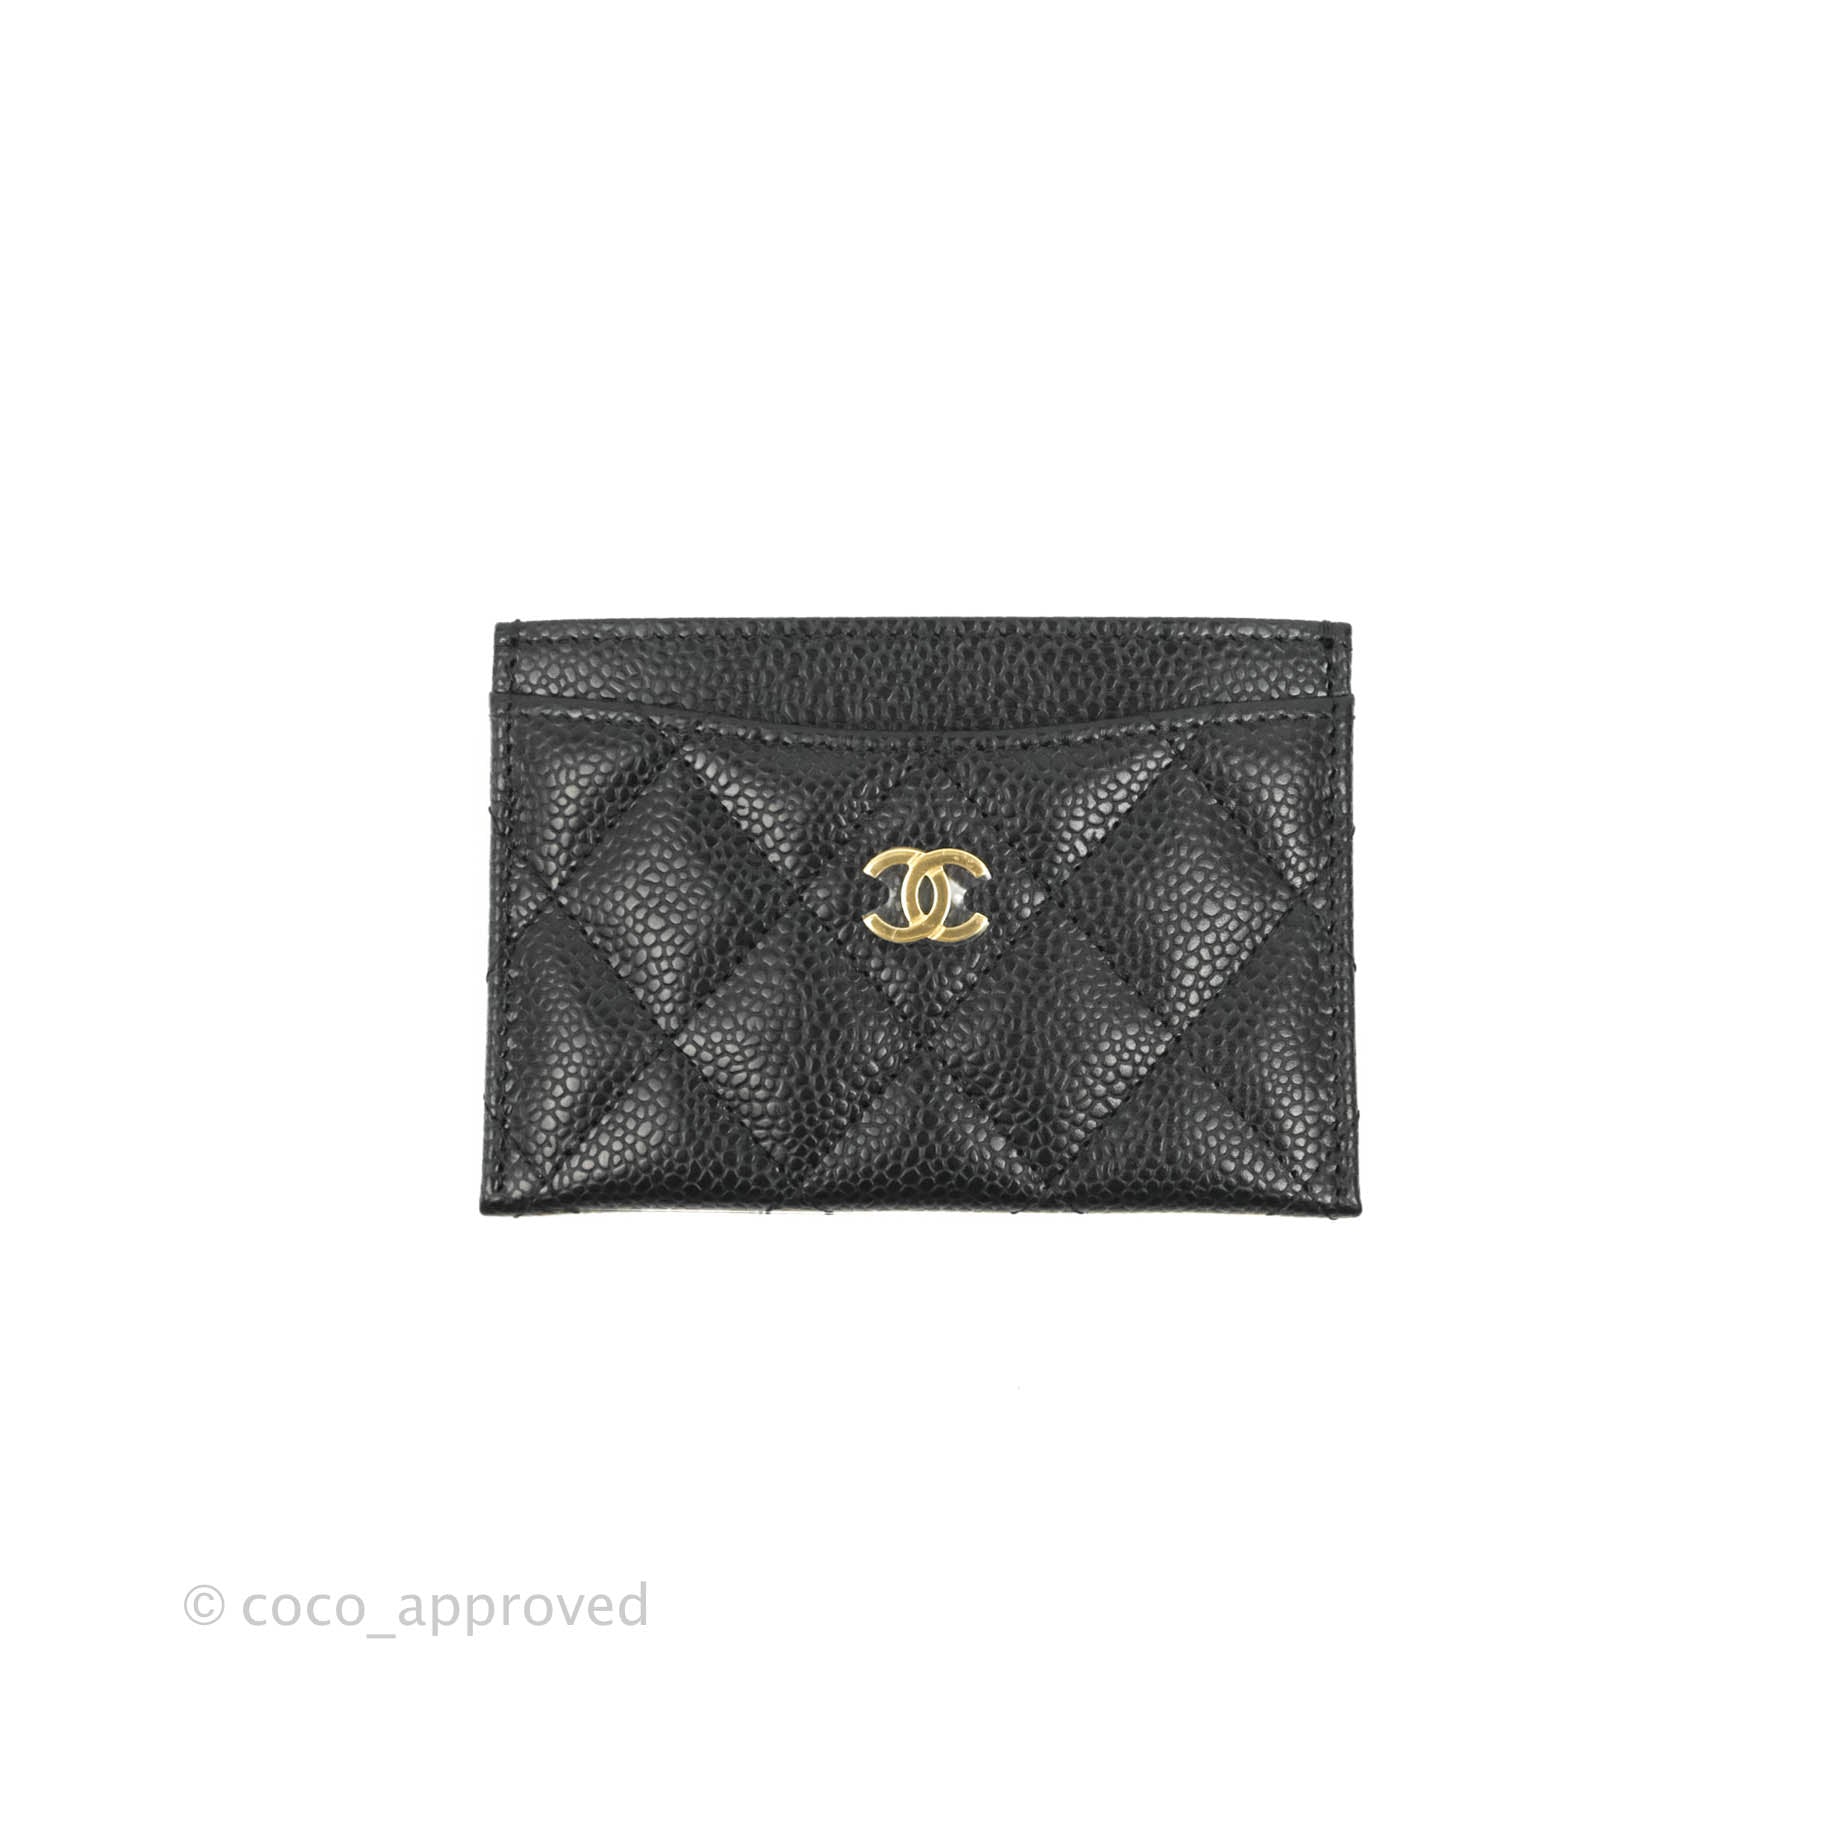 chanel phone and card holder